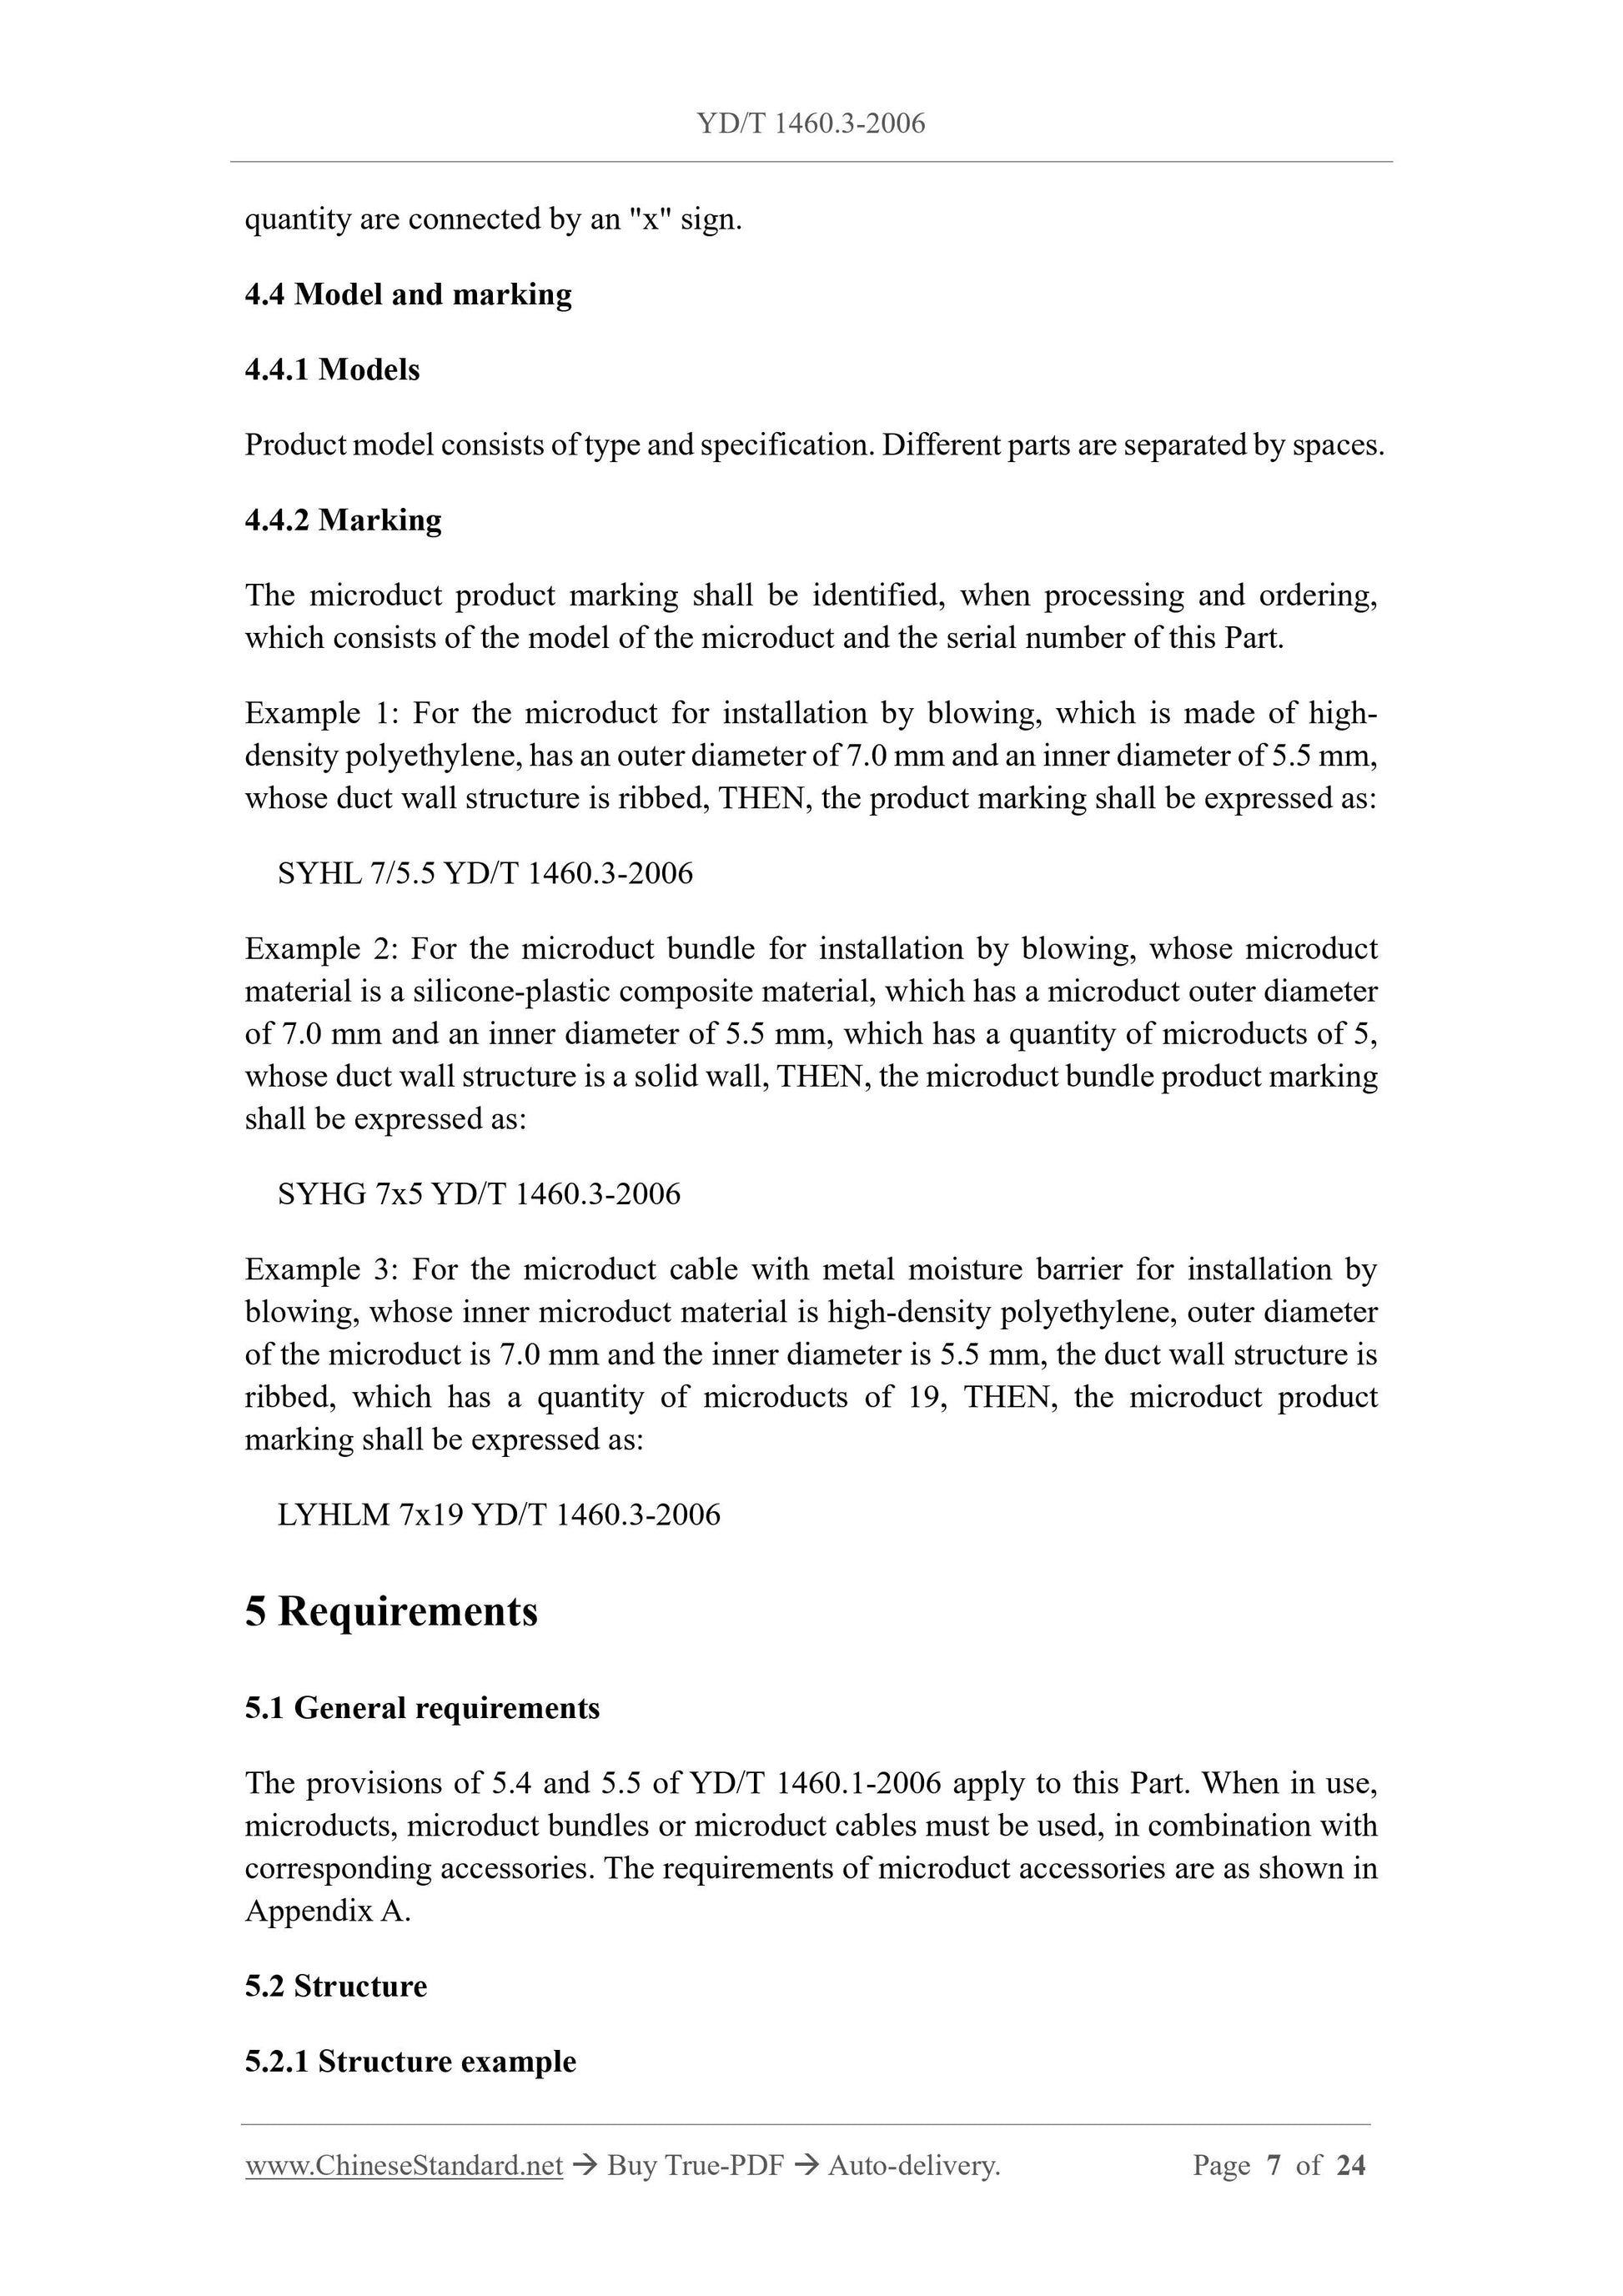 YD/T 1460.3-2006 Page 5